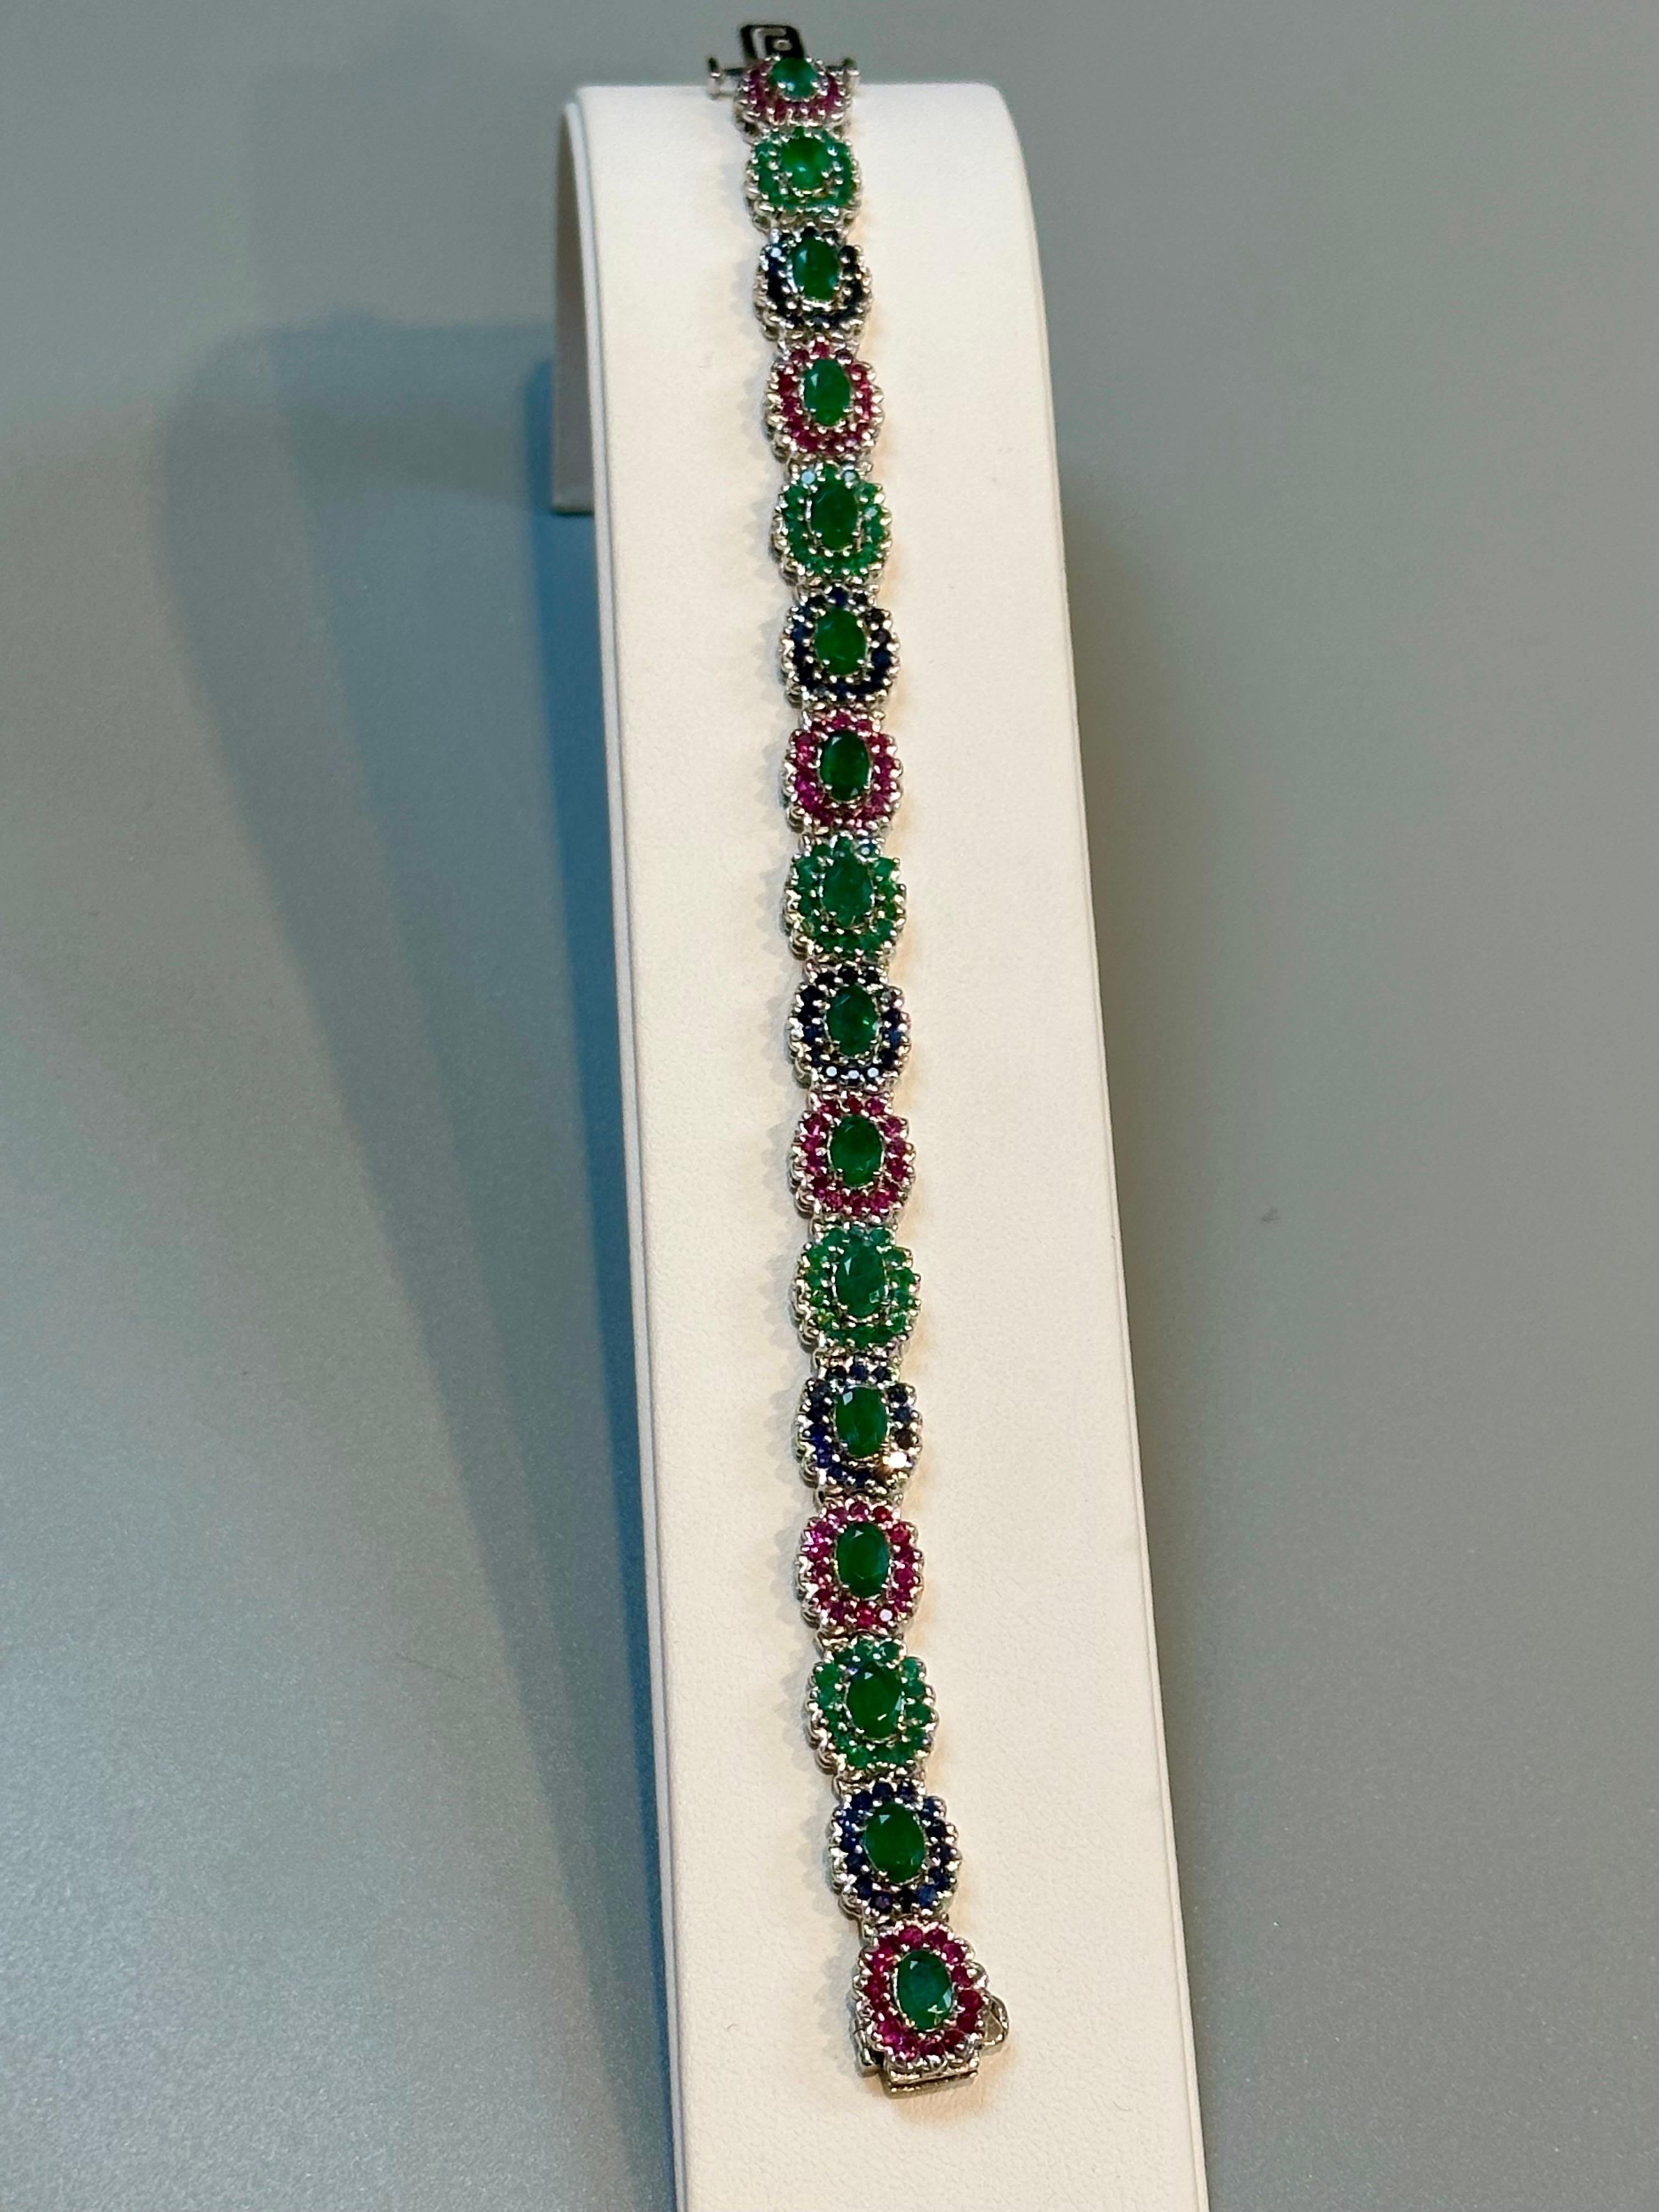 8 Ct Oval Cut Emerald & Ruby & Sapphire Tennis Bracelet 14 Kt White Gold 25.5Gm In Excellent Condition For Sale In New York, NY